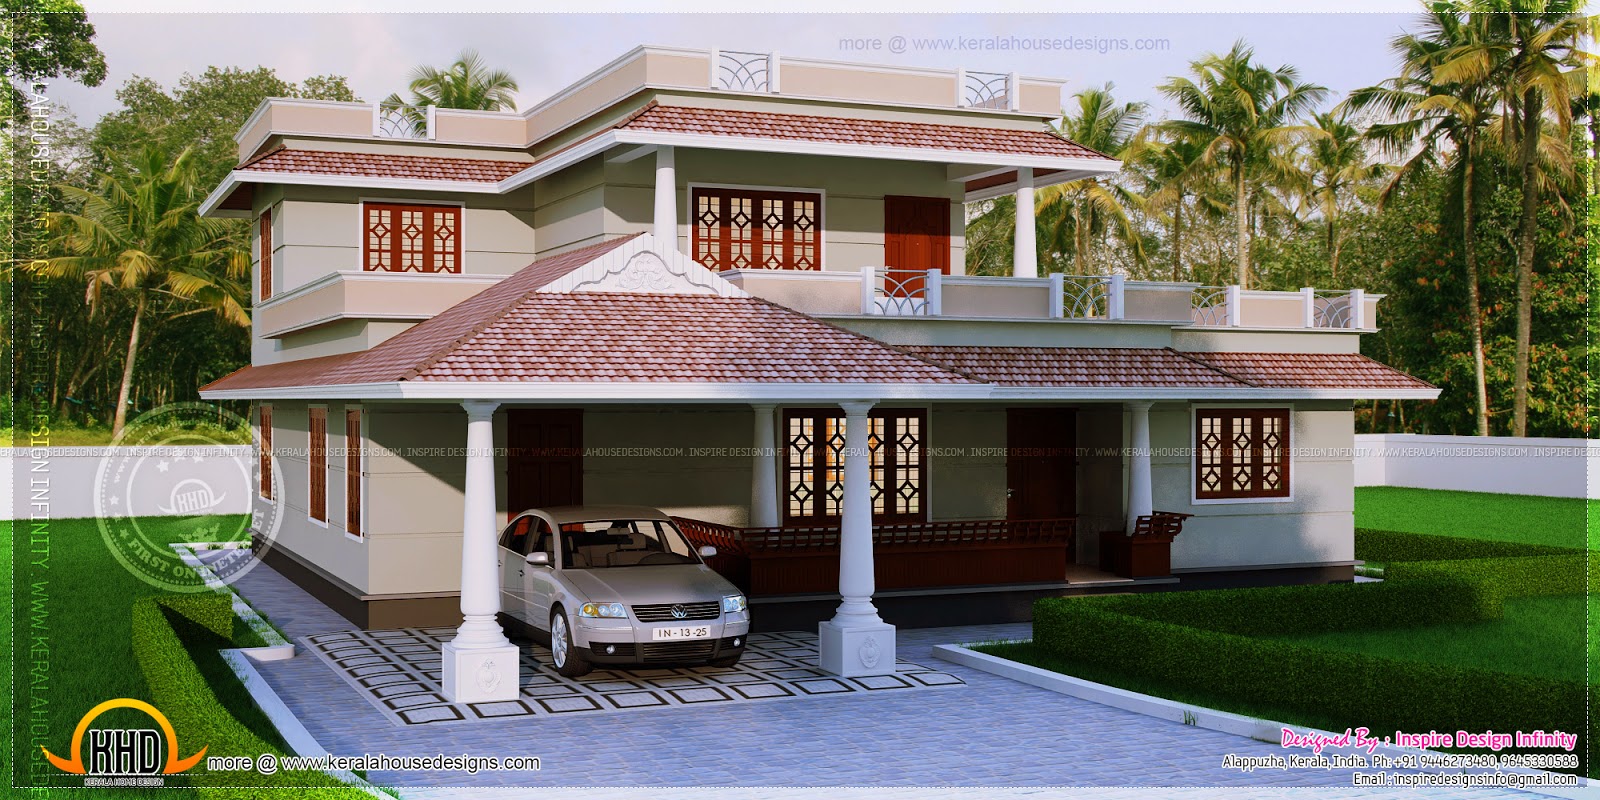  4  bedroom  Kerala  style  house  in 300 square yards Home  